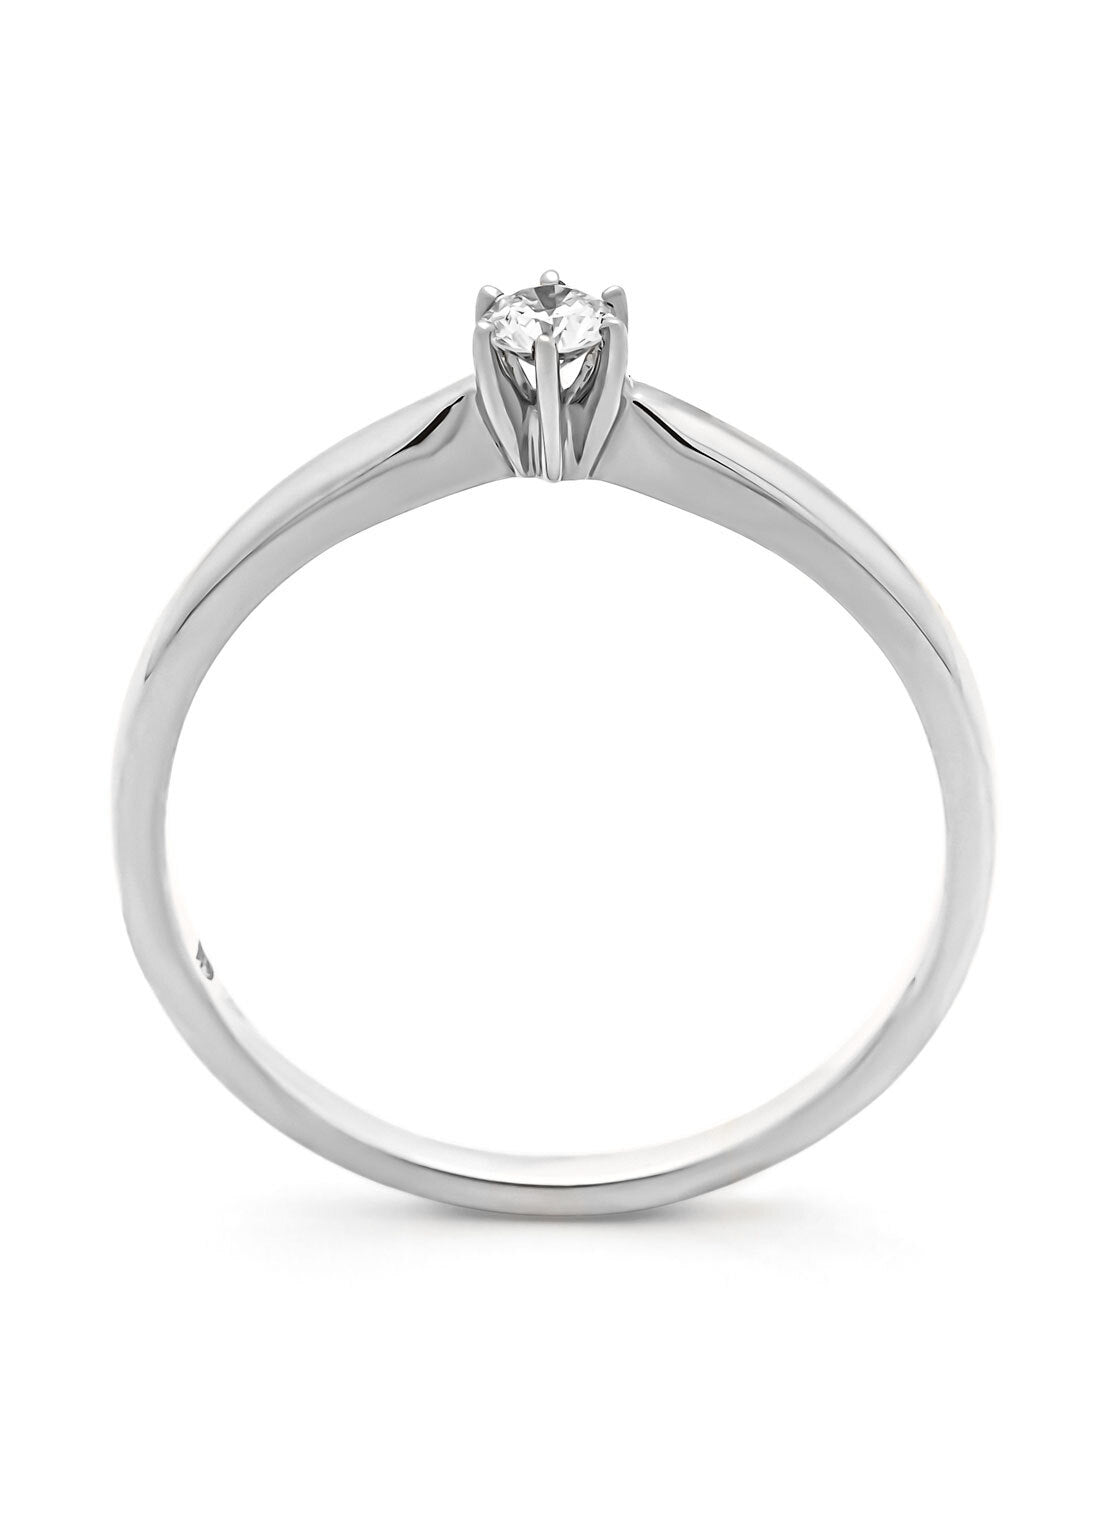 White gold ring, 0.10 ct Diamant, Hearts & Arrows